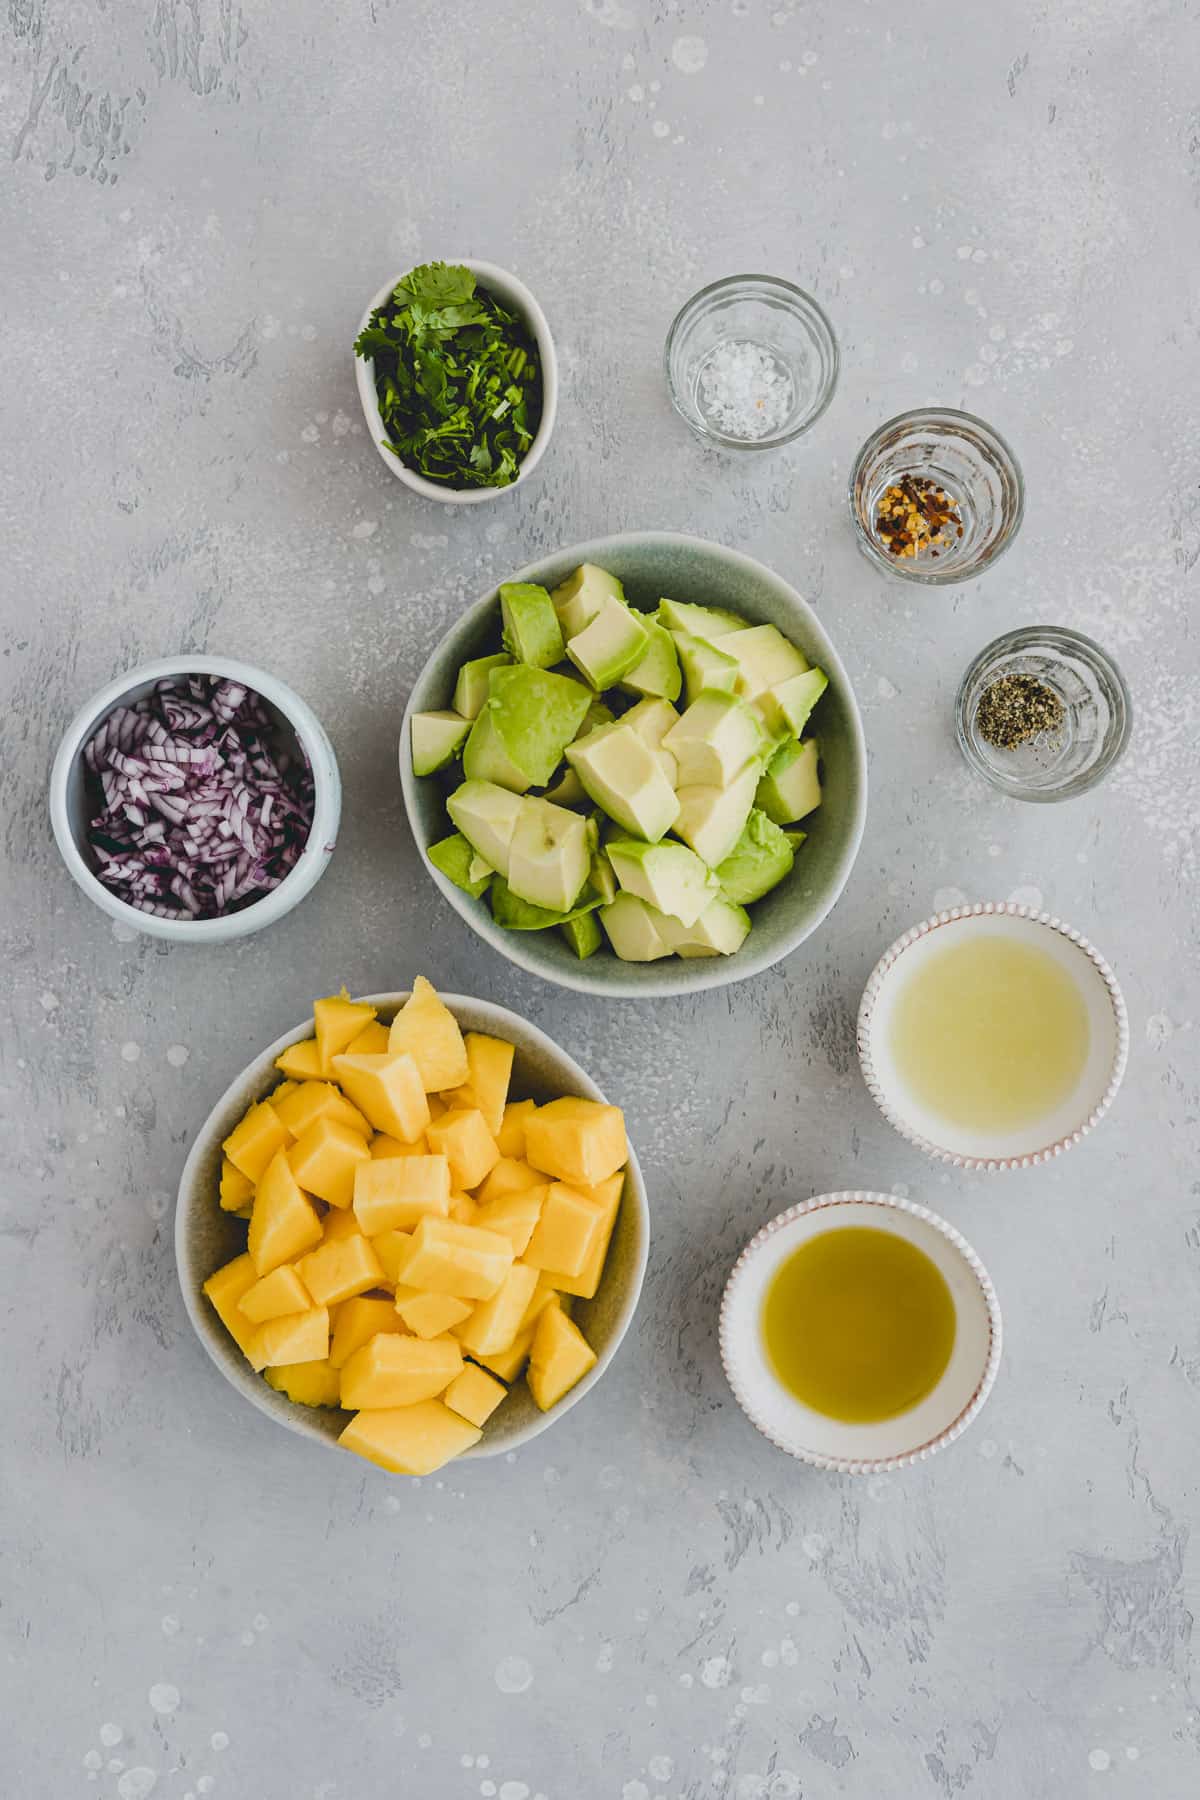 Top view of ingredients for mango avocado salad in small bowls, including diced mango, diced avocados, minced red onion, cilantro, olive oil, lime juice, salt & pepper, and red pepper flakes.